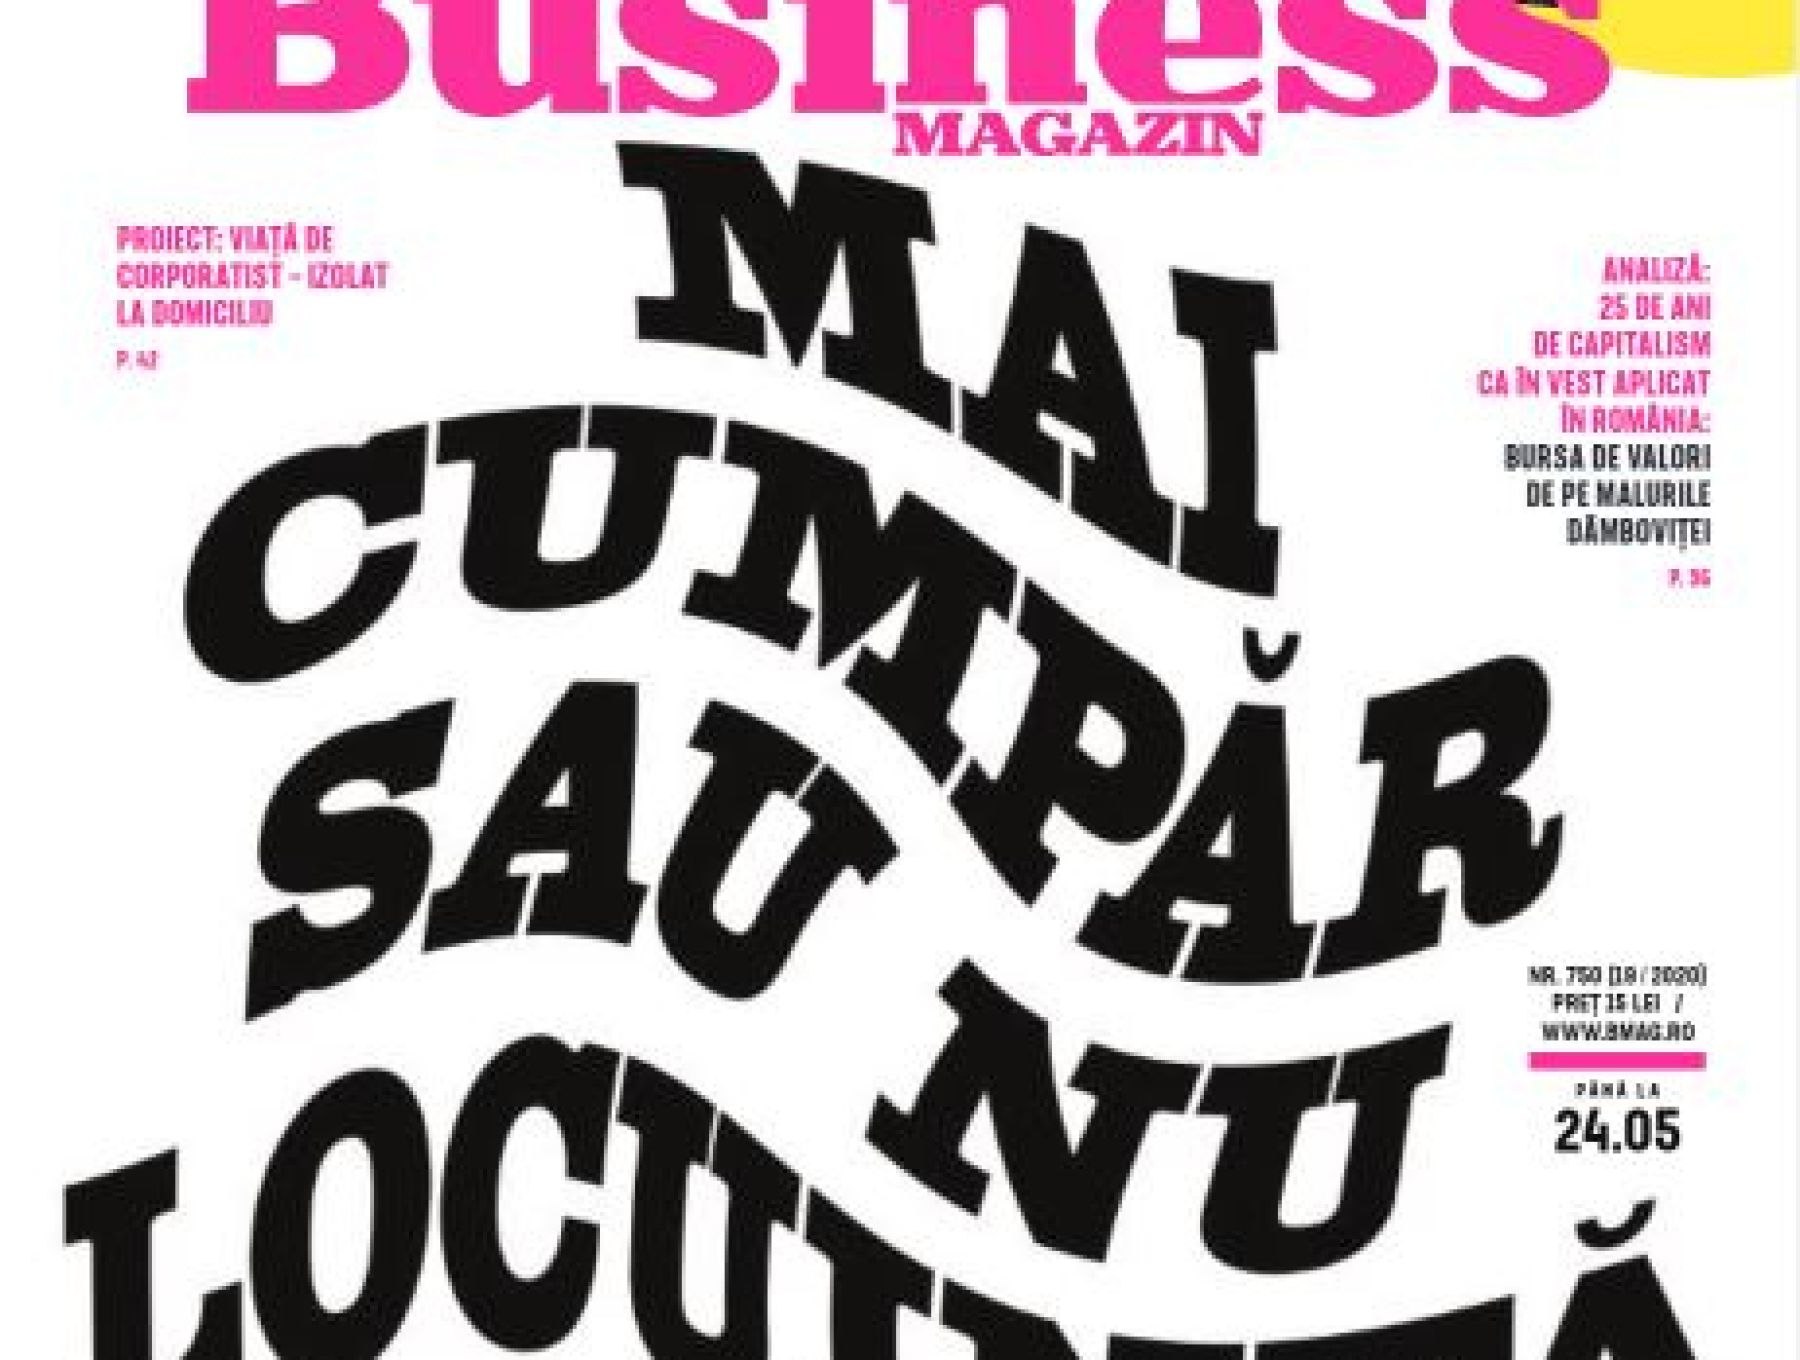 Beatrice Dumitrașcu for Business Magazin: ”The location will make the difference when we speak about real estate”